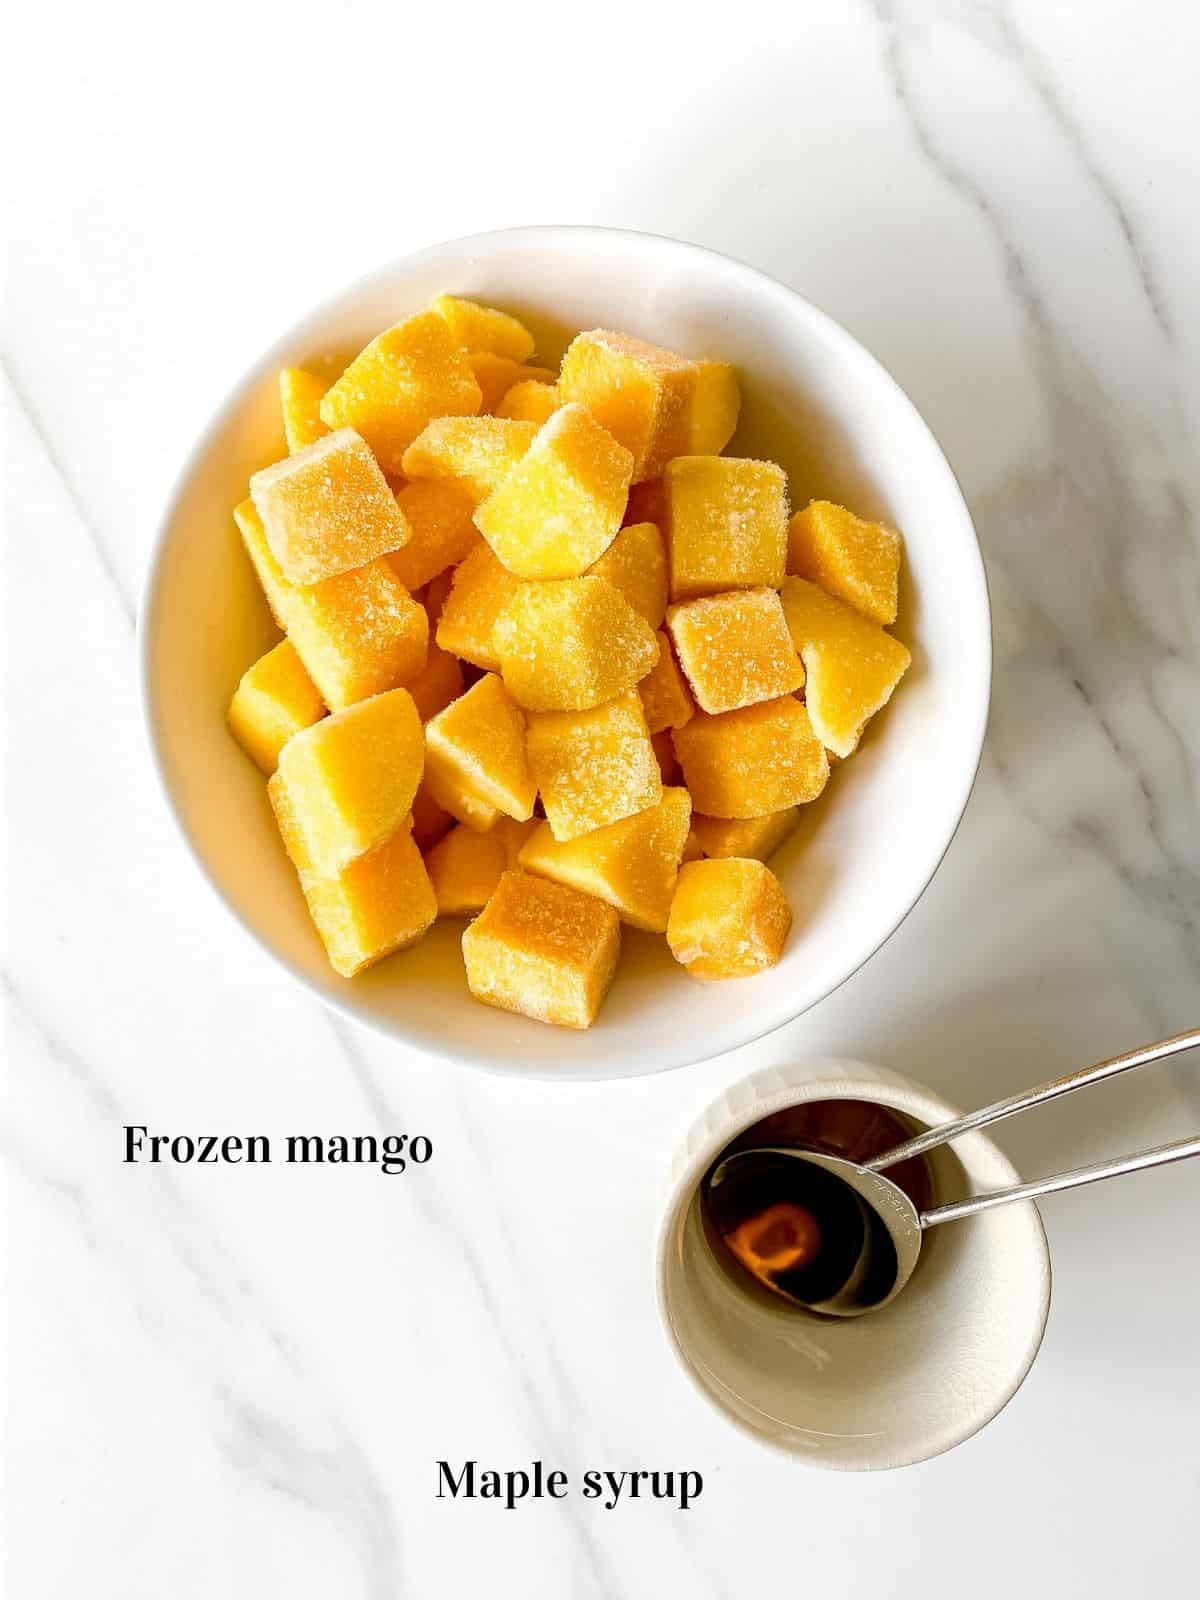 individually labelled bowl of frozen mango with a smaller bowl of maple syrup.